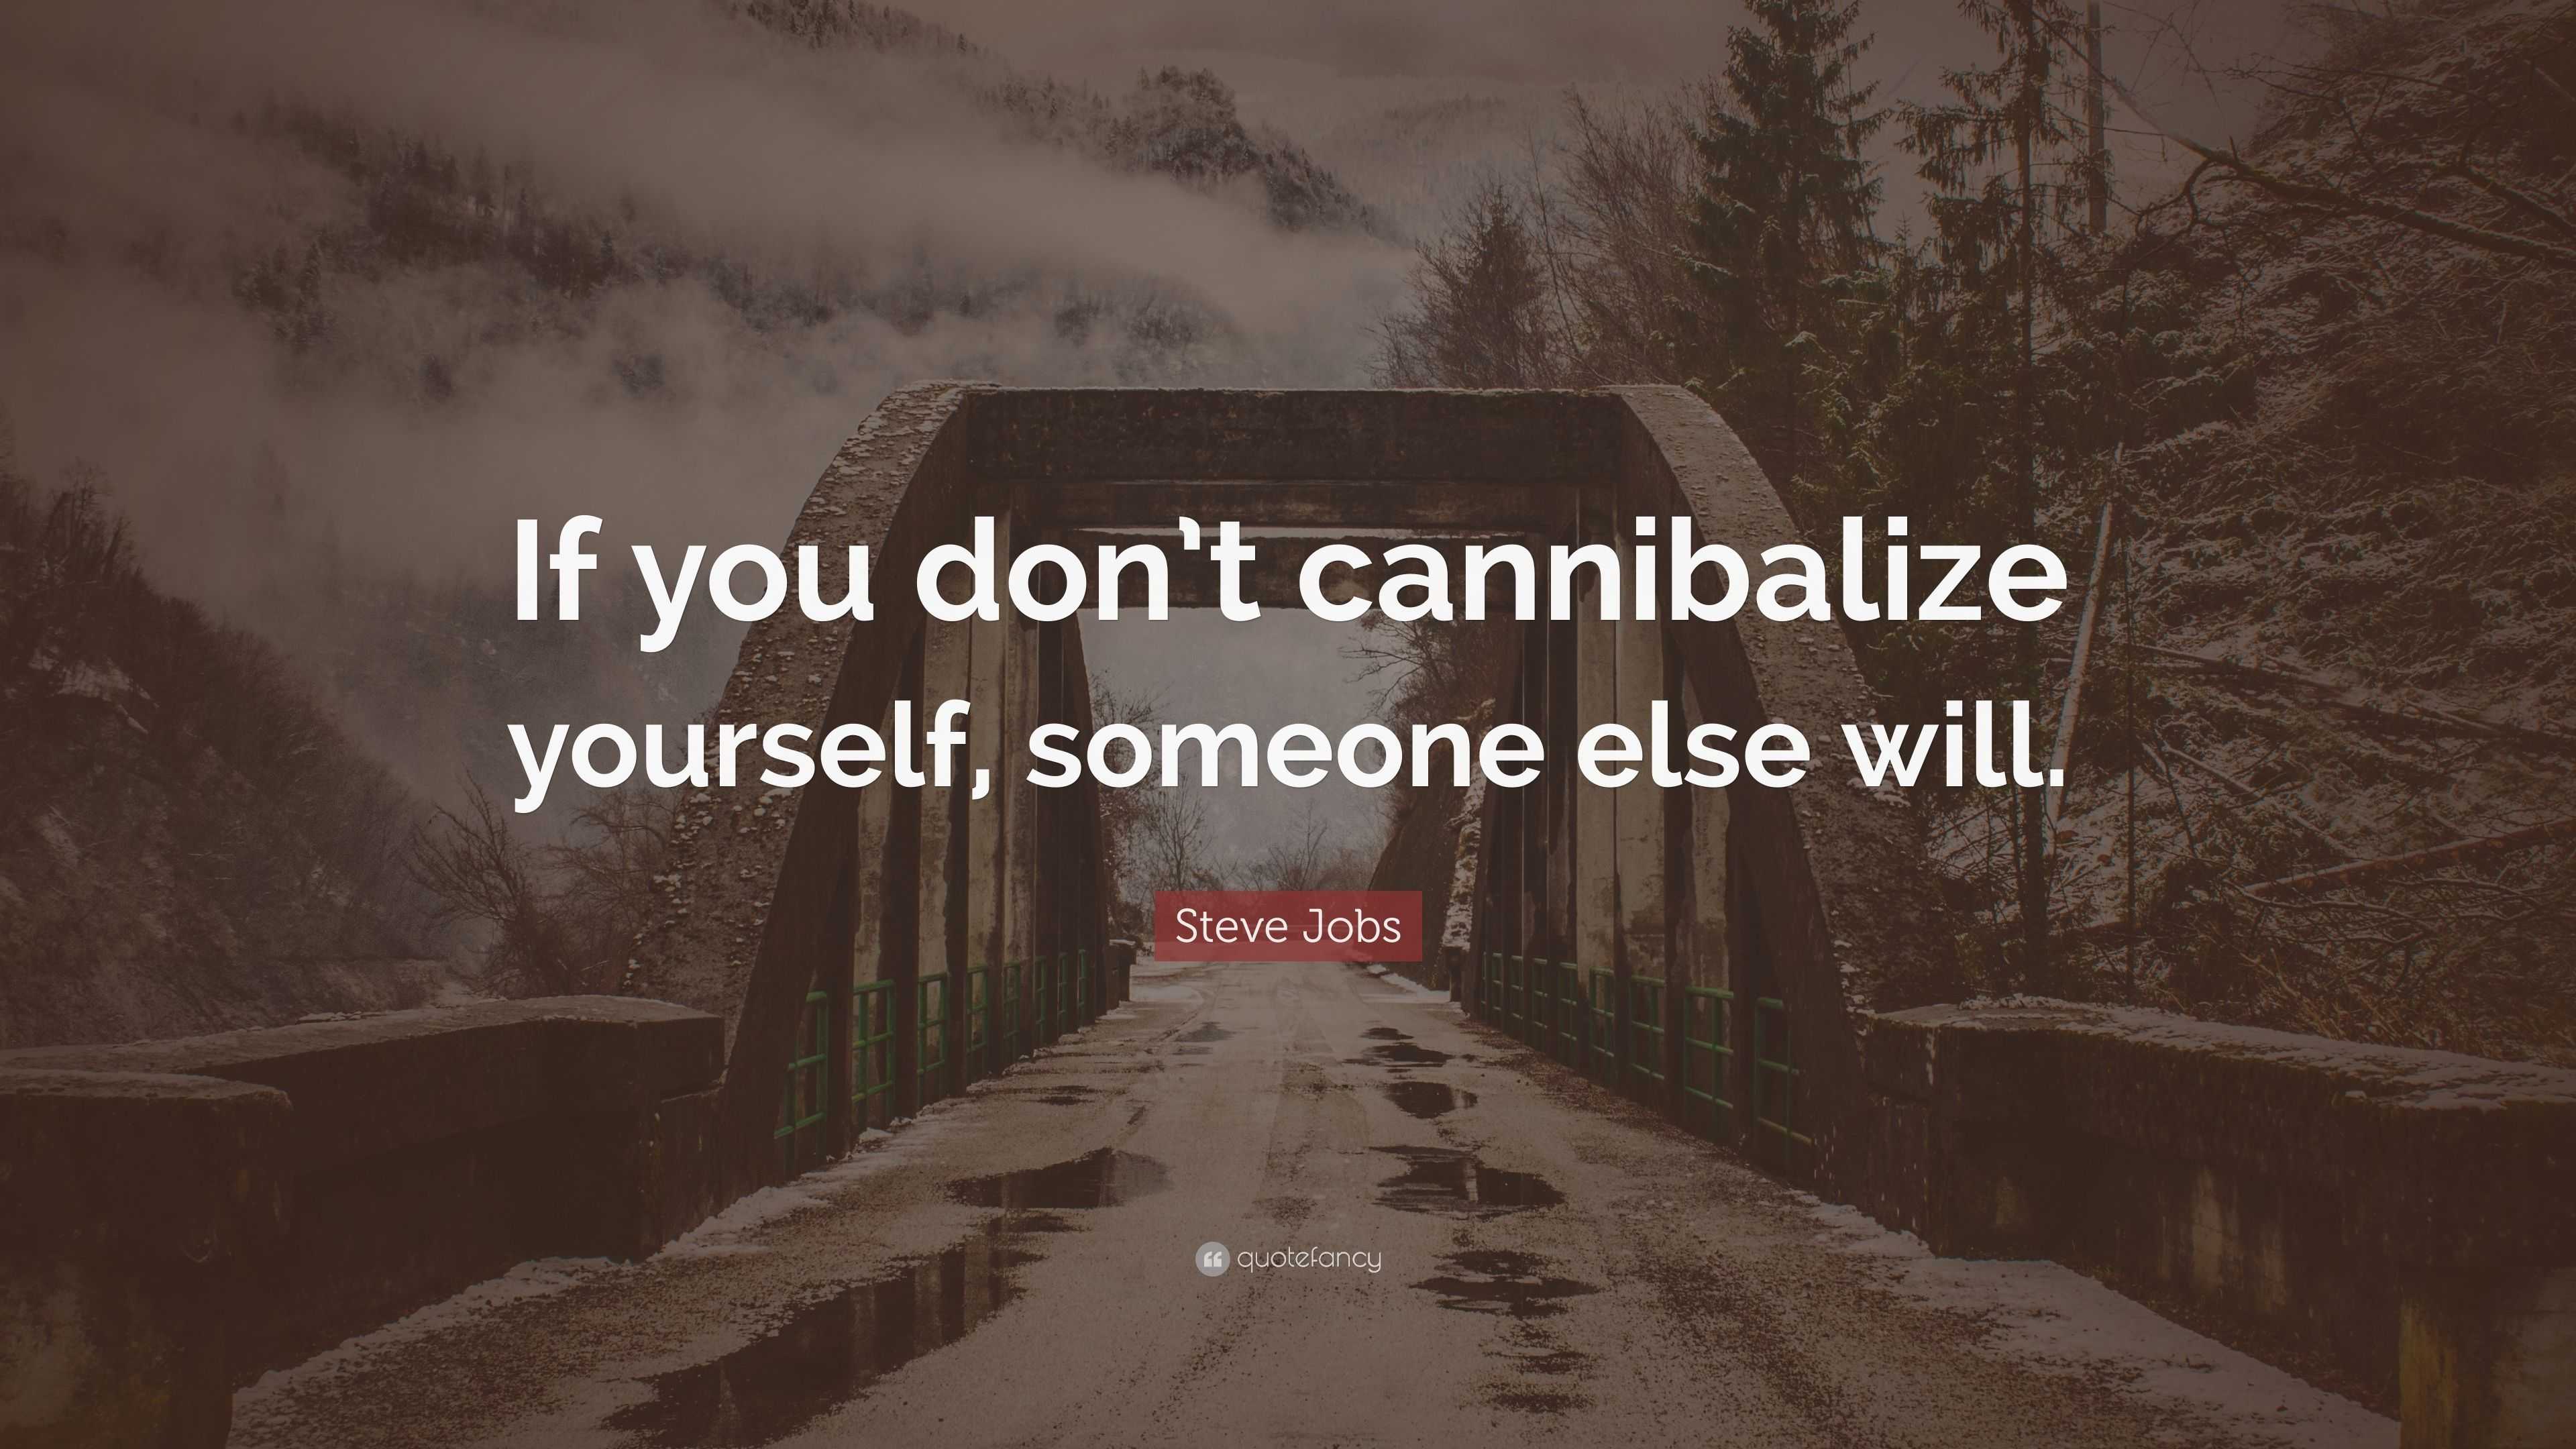 If you don't cannibalize yourself, someone else will - Future Startup